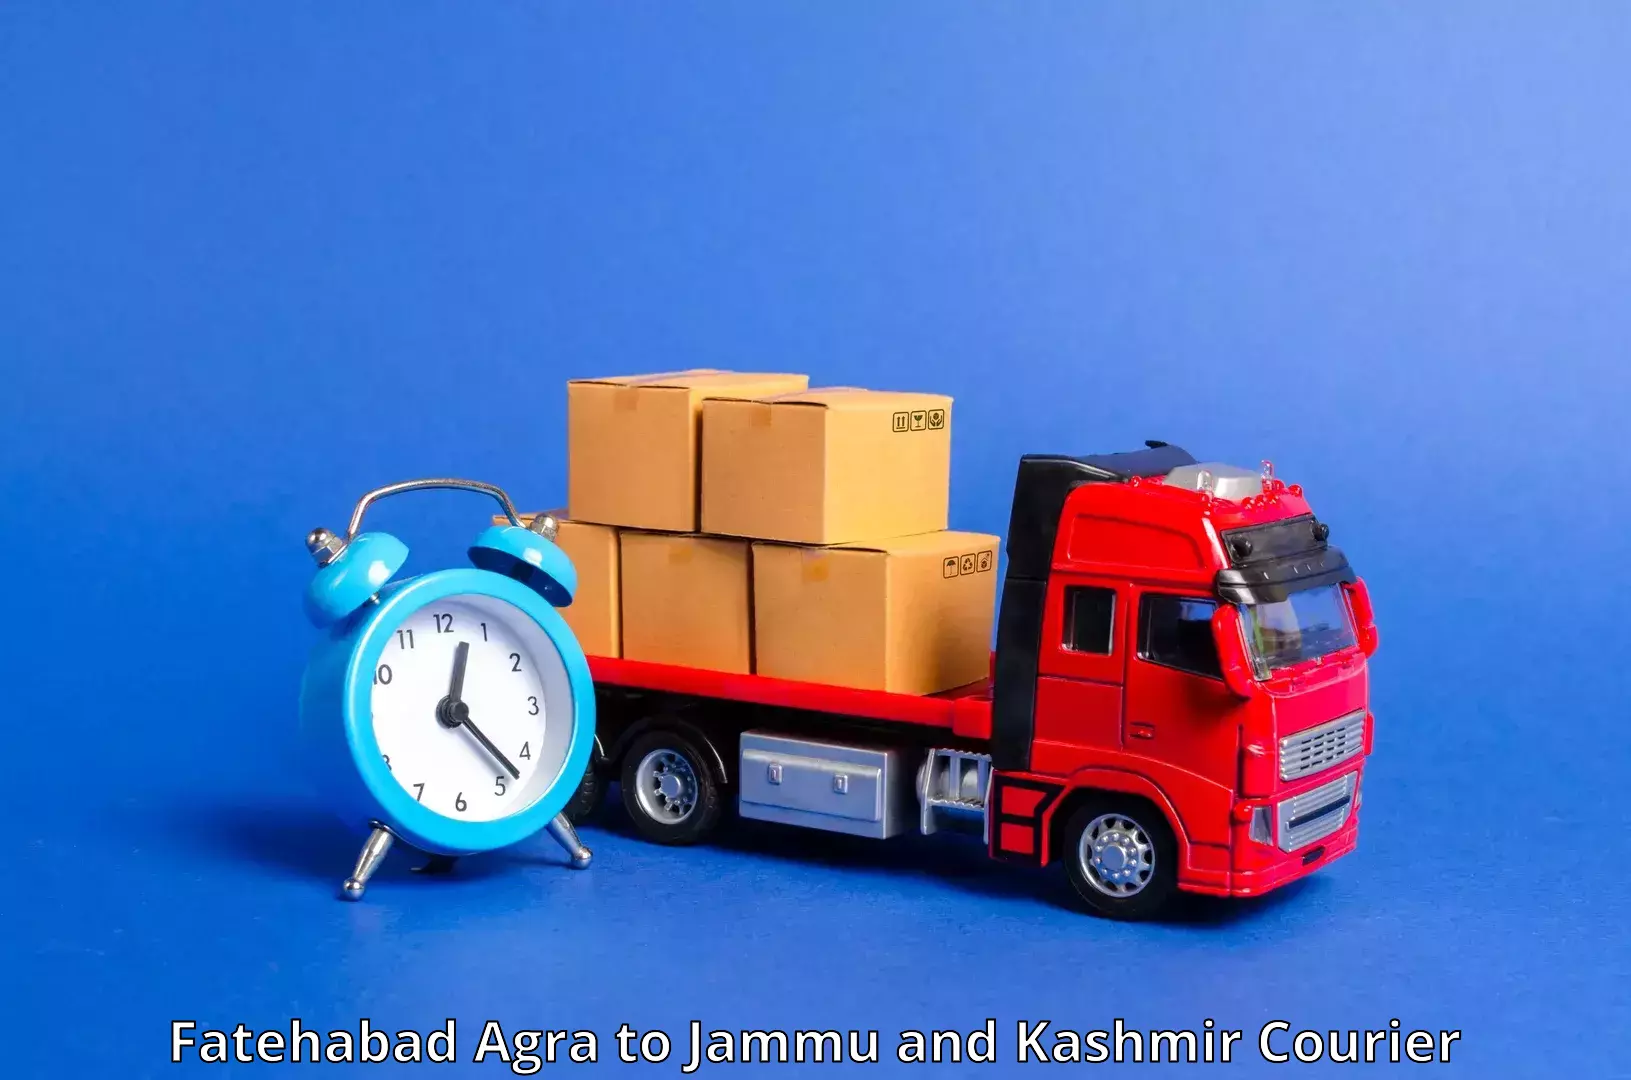 Shipping and handling Fatehabad Agra to Leh